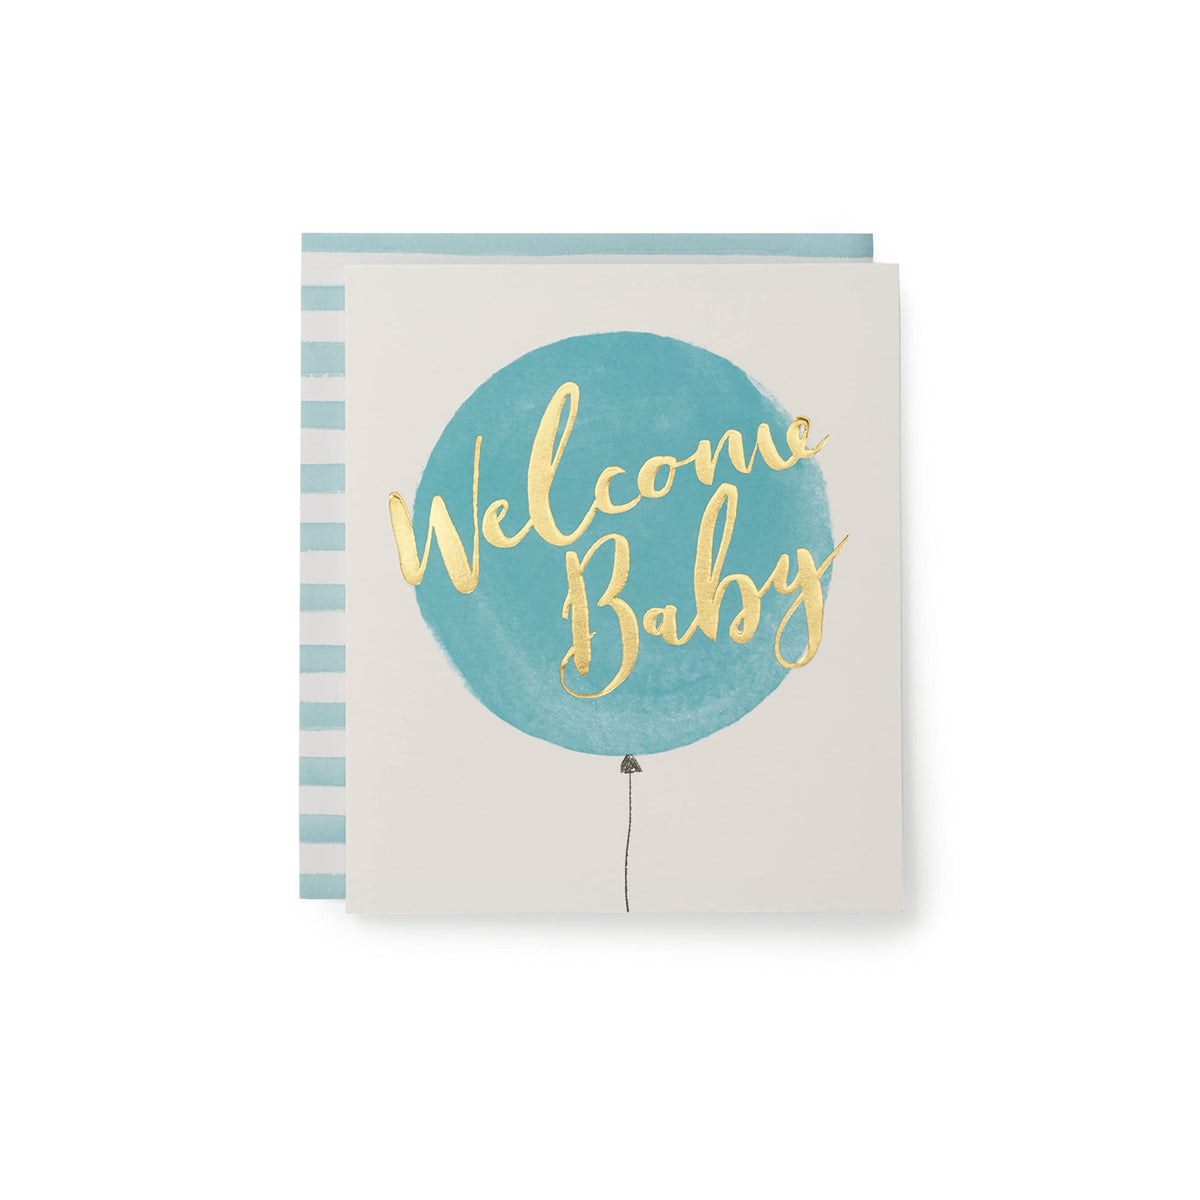 UK Greetings - Kindred - Welcome Balloon - Baby Boy Card, Multi, 137 mm x 159 mm